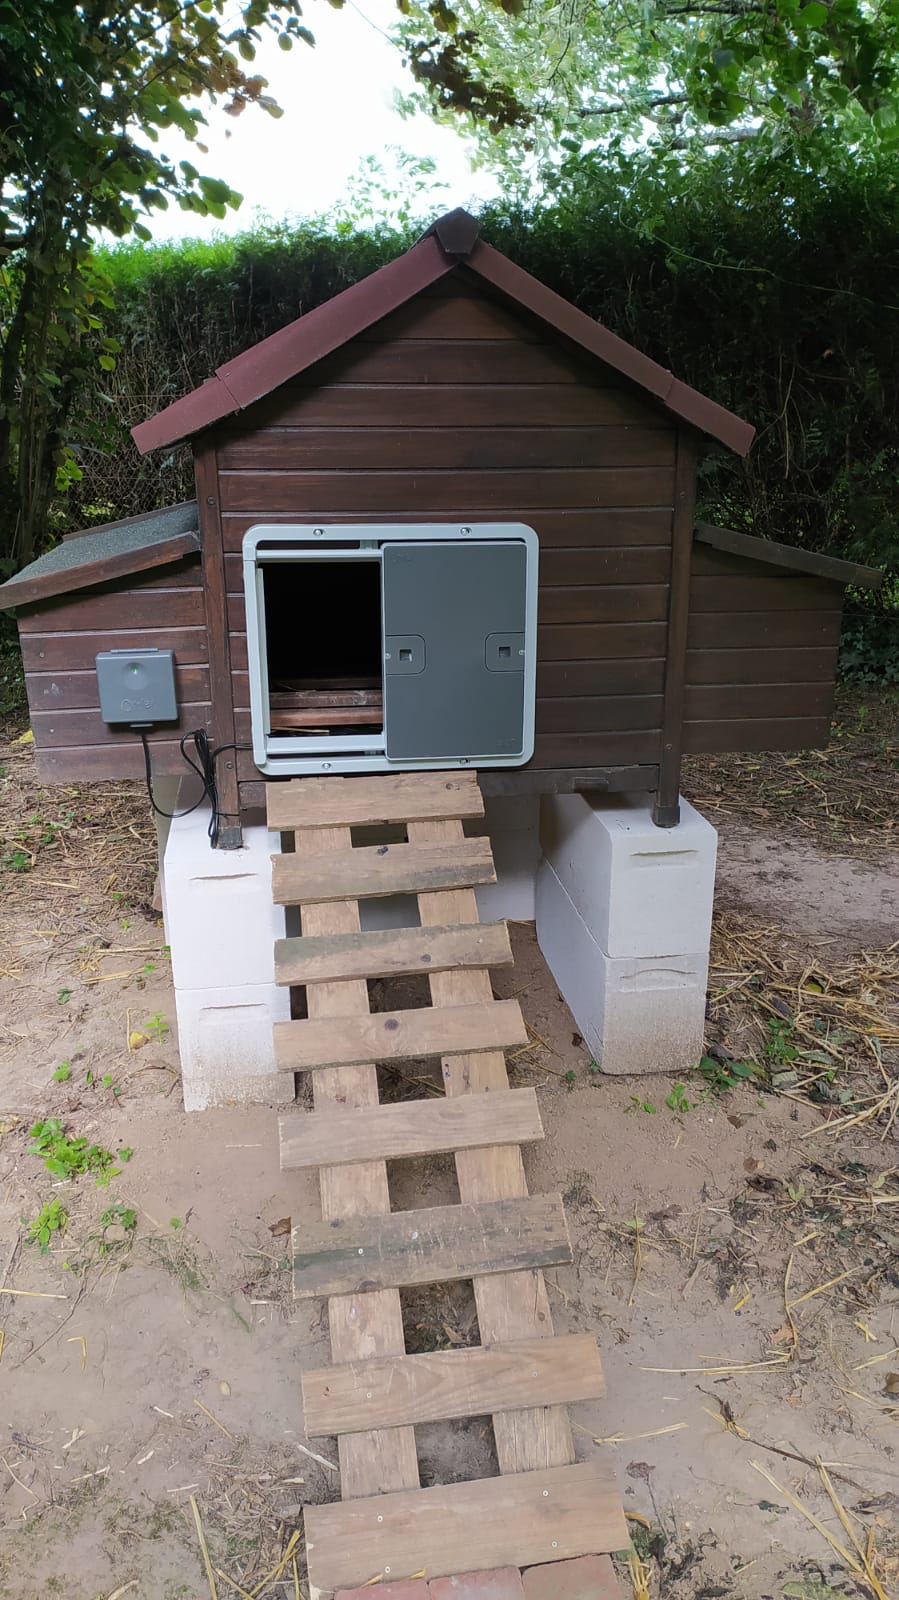 A grey automatic coop door fixed on a wooden coop